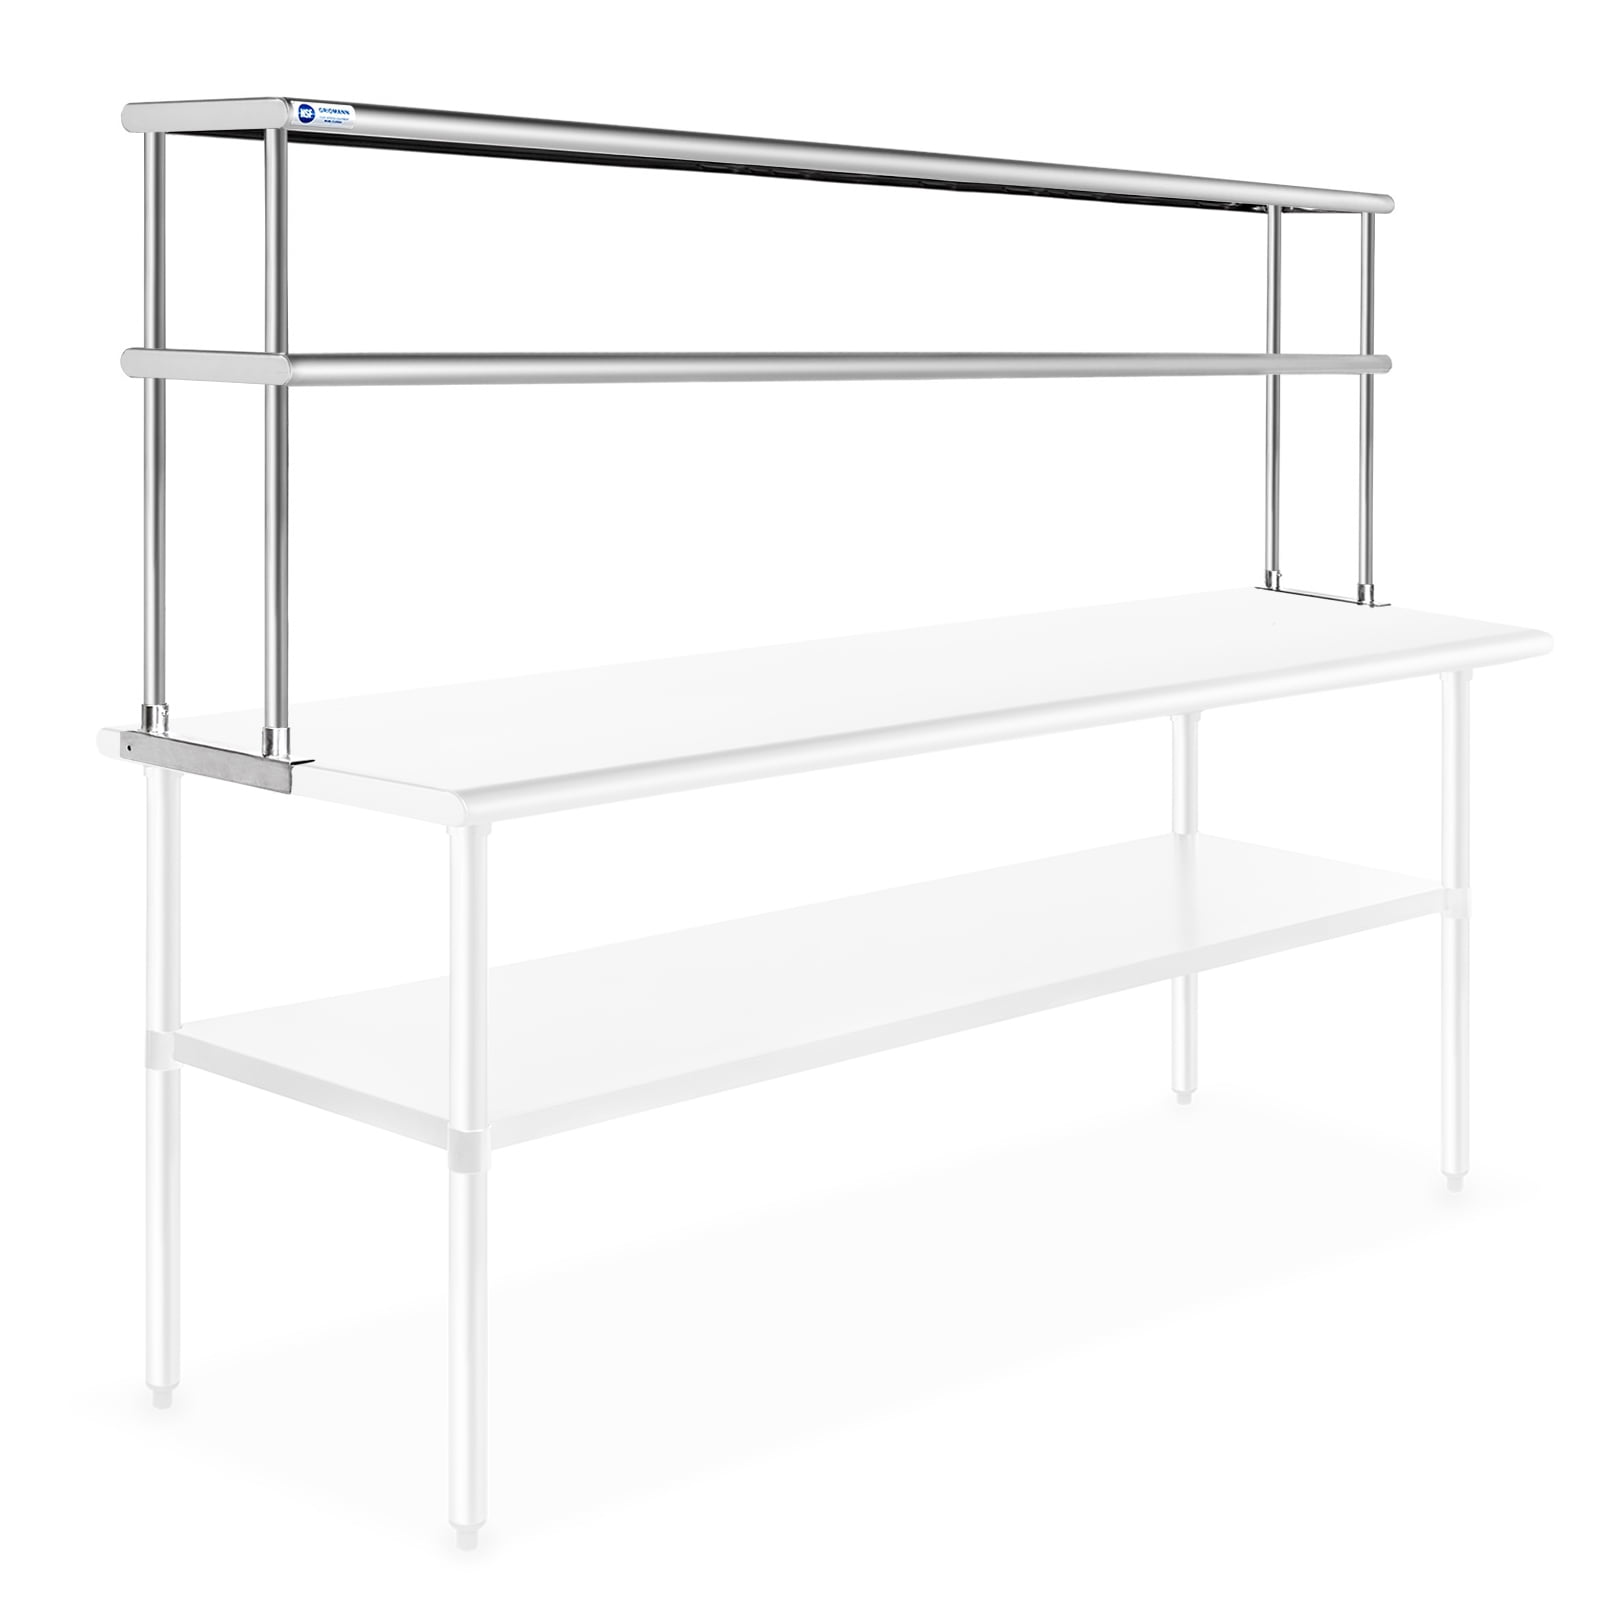 Gridmann Nsf Stainless Steel Commercial, Stainless Steel Work Table With 2 Shelves